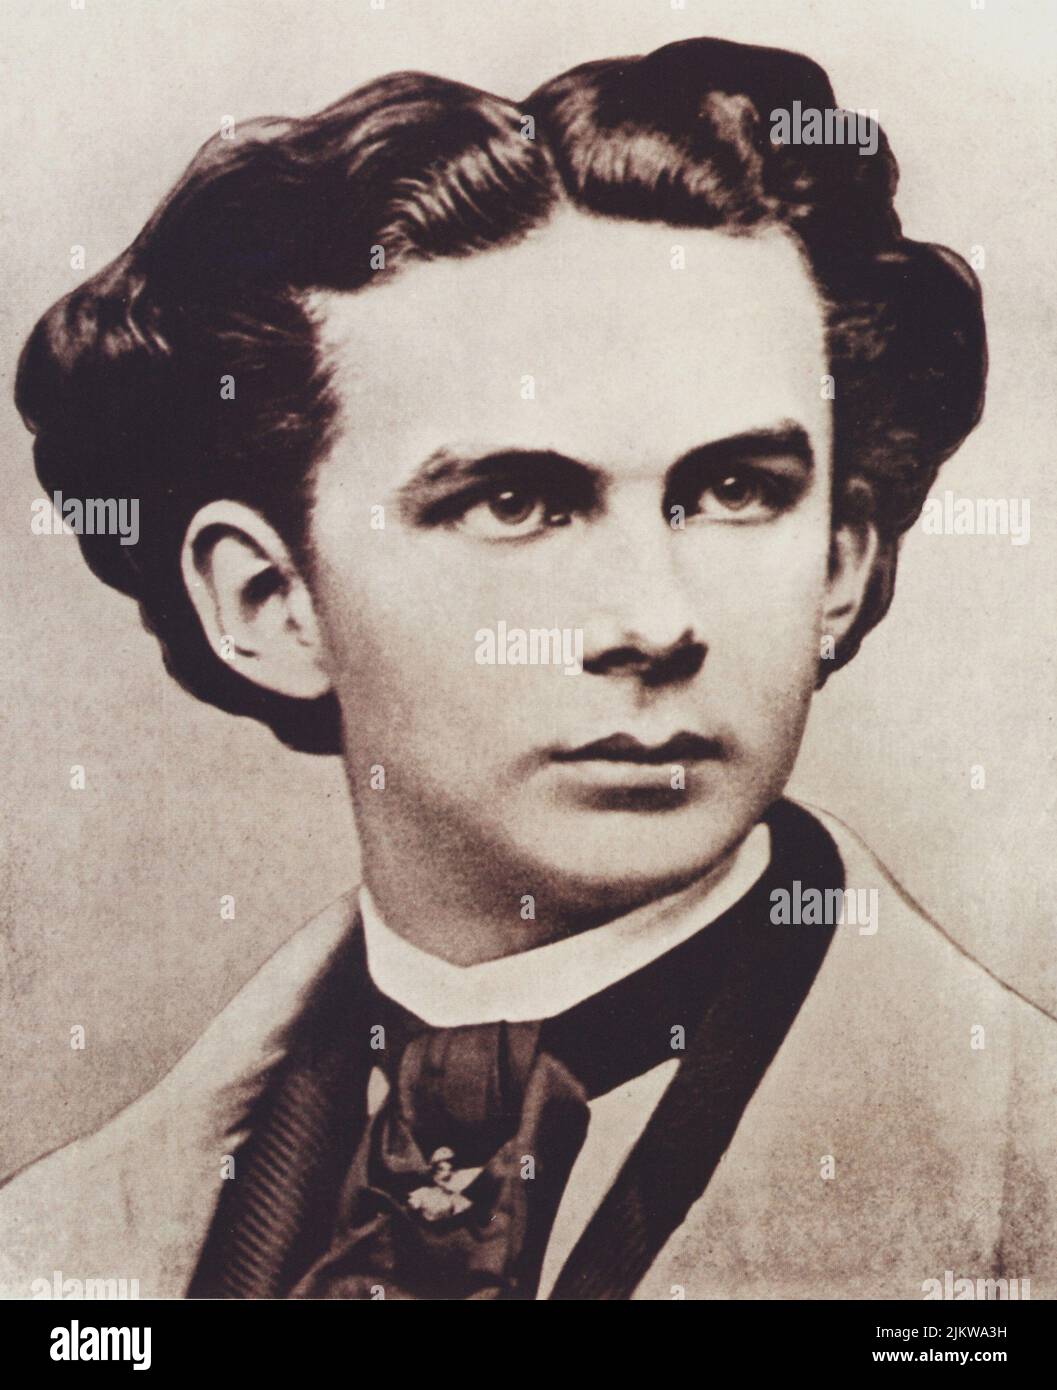 1865  , GERMANY  : The mad and suicide king of Bayern LUDWIG II of Wittelsbach ( 1845 - 1886 ) from 1864 to 1886 , friend of Opera music composer Richard Wagner . Photo by Joseph Albert   - RE - REALI - ROYALTY - nobili - nobiltà - BAVIERA - music - classical - musica classica - portrait - ritratto - collar - colletto  - GAY - homosexual - homosexuality - omosessuale - omosessualità - suicida - suicidio  - german nobility  - tie - cravatta - collar - colletto - fermacravatta - pin  ----  Archivio GBB Stock Photo